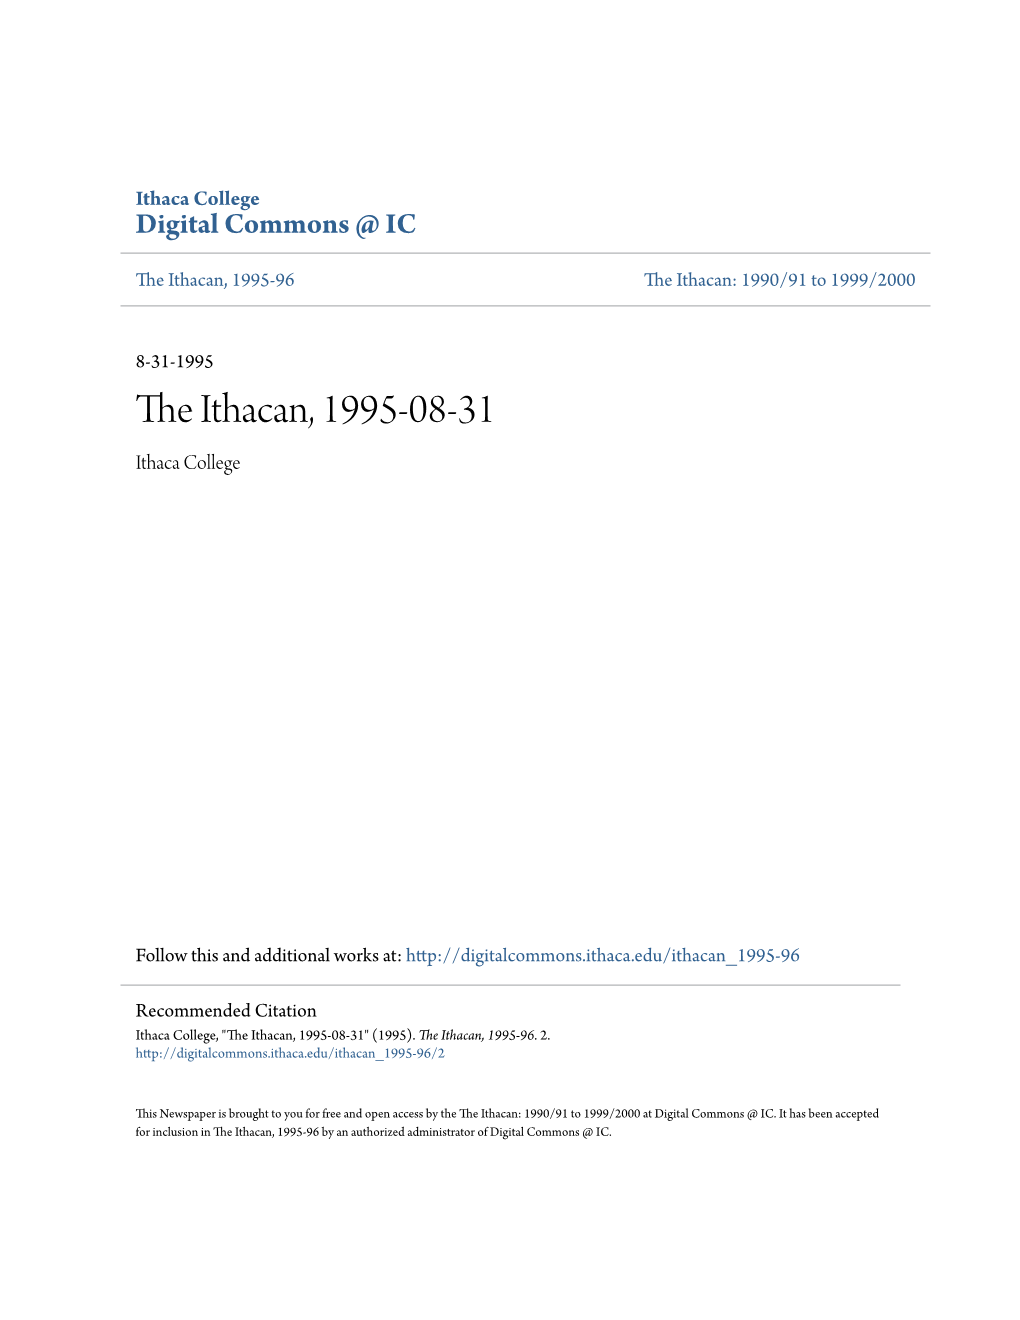 The Ithacan, 1995-08-31